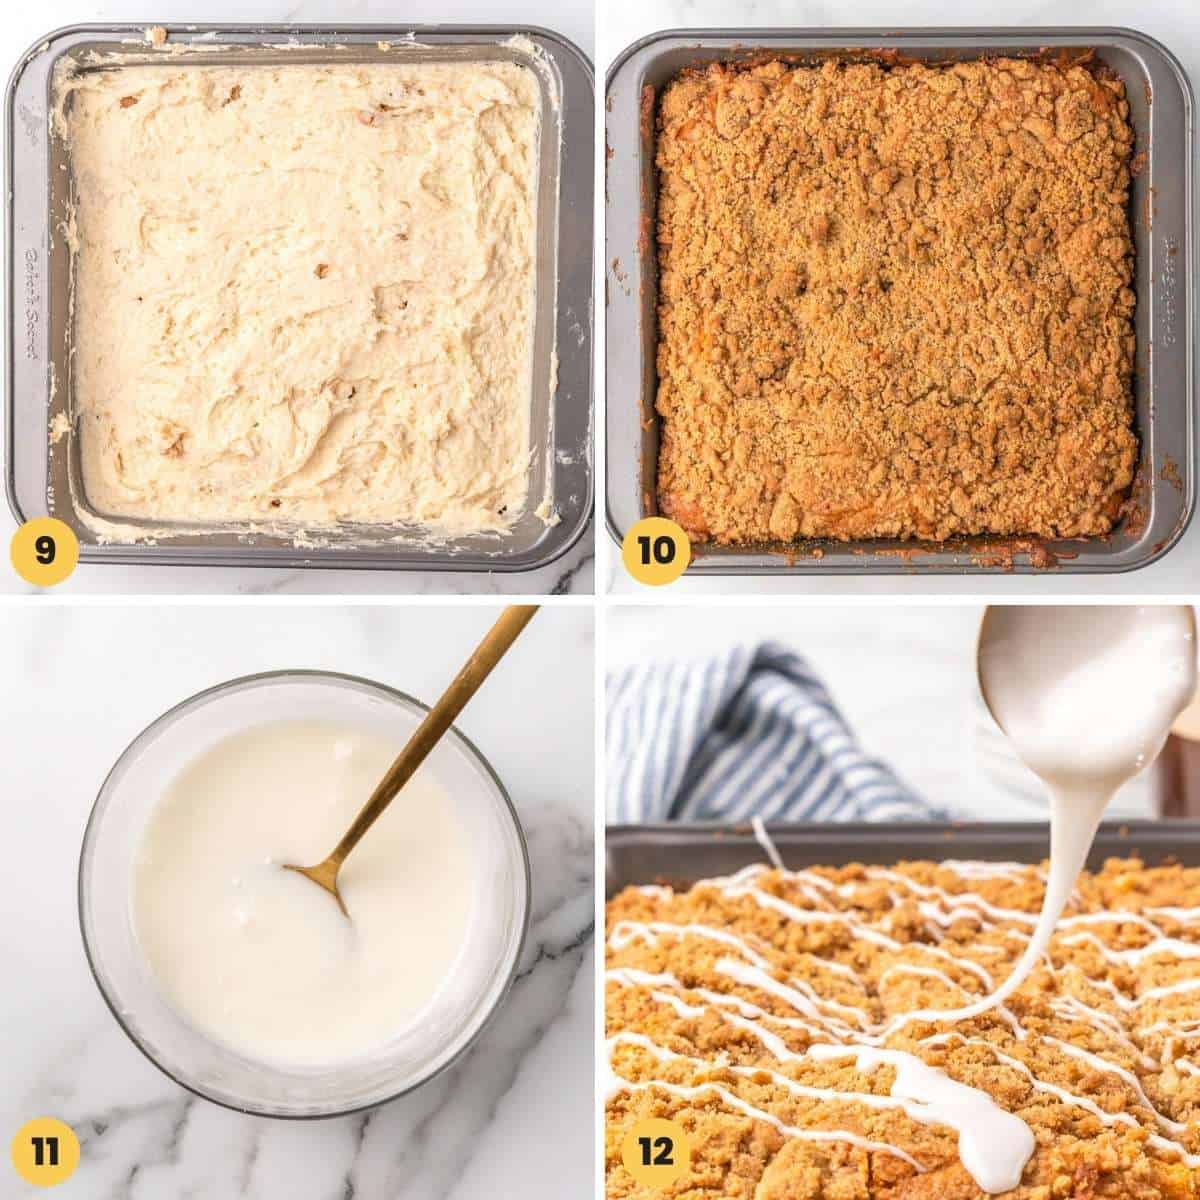 Four photos showing how to bake a coffee cake and top it with sugar glaze